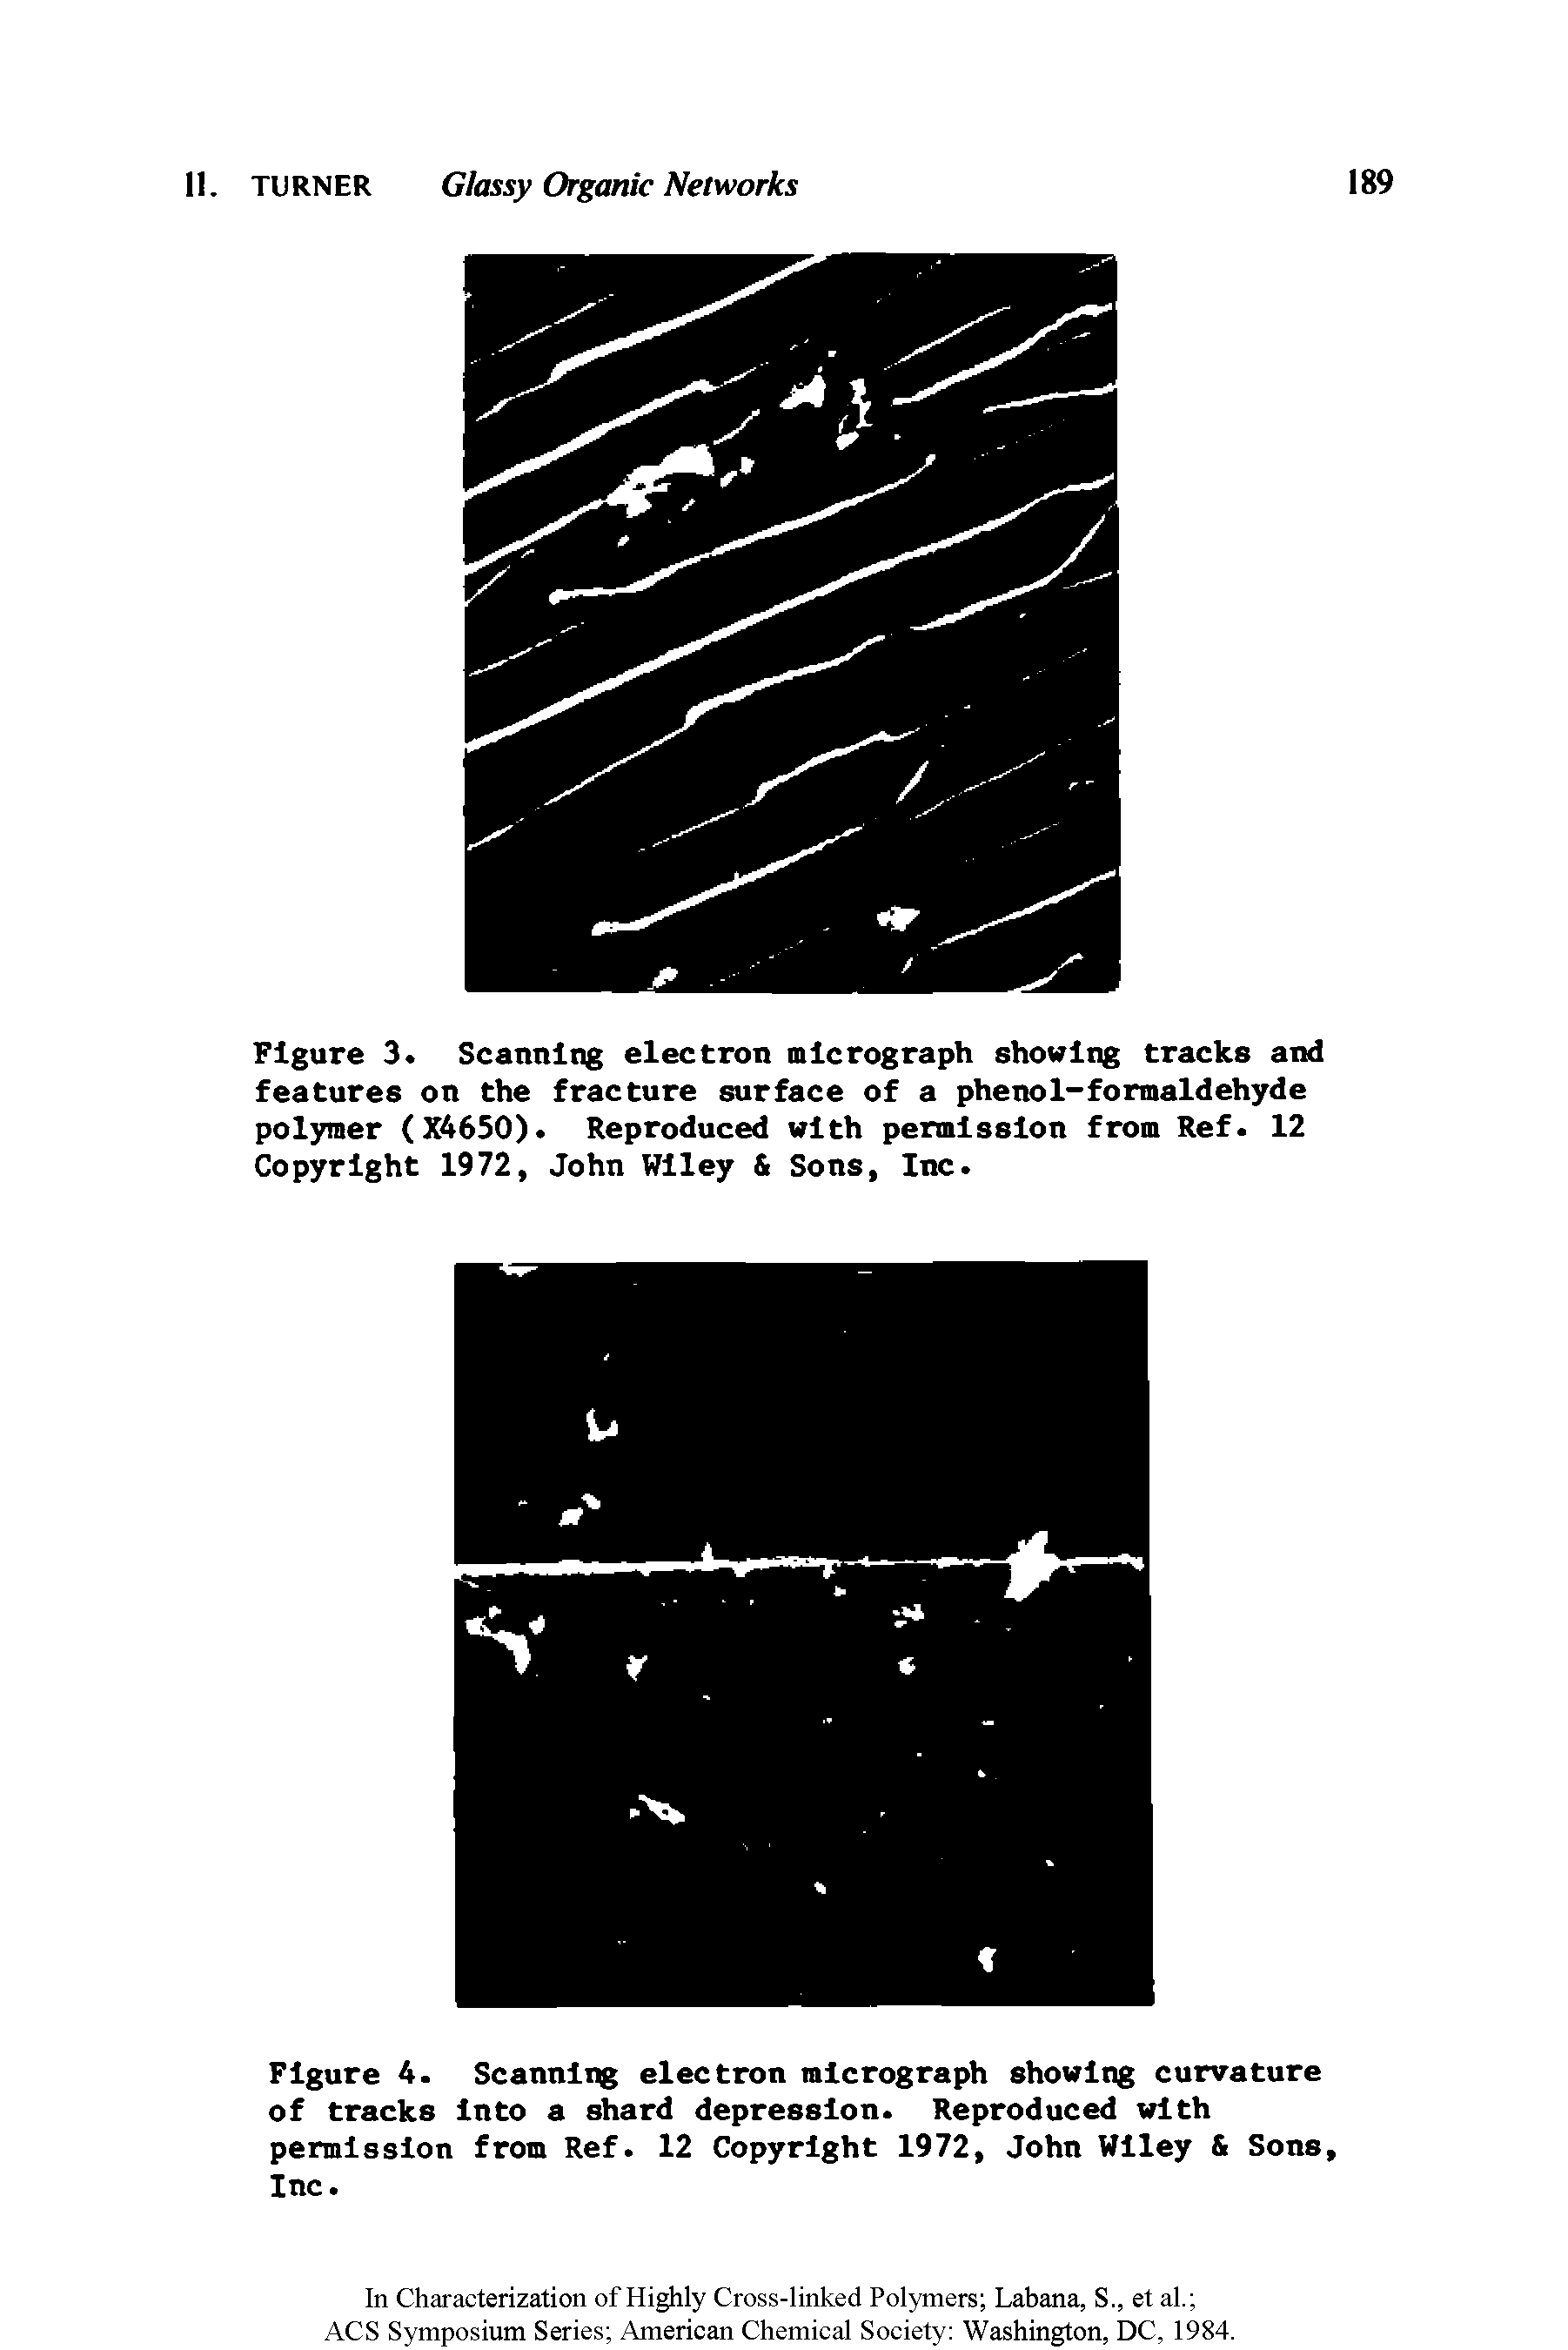 Figure 3. Scanning electron micrograph showing tracks and features on the fracture surface of a phenol-formaldehyde polymer (X4650). Reproduced with permission from Ref. 12 Copyright 1972, John Wiley Sons, Inc.